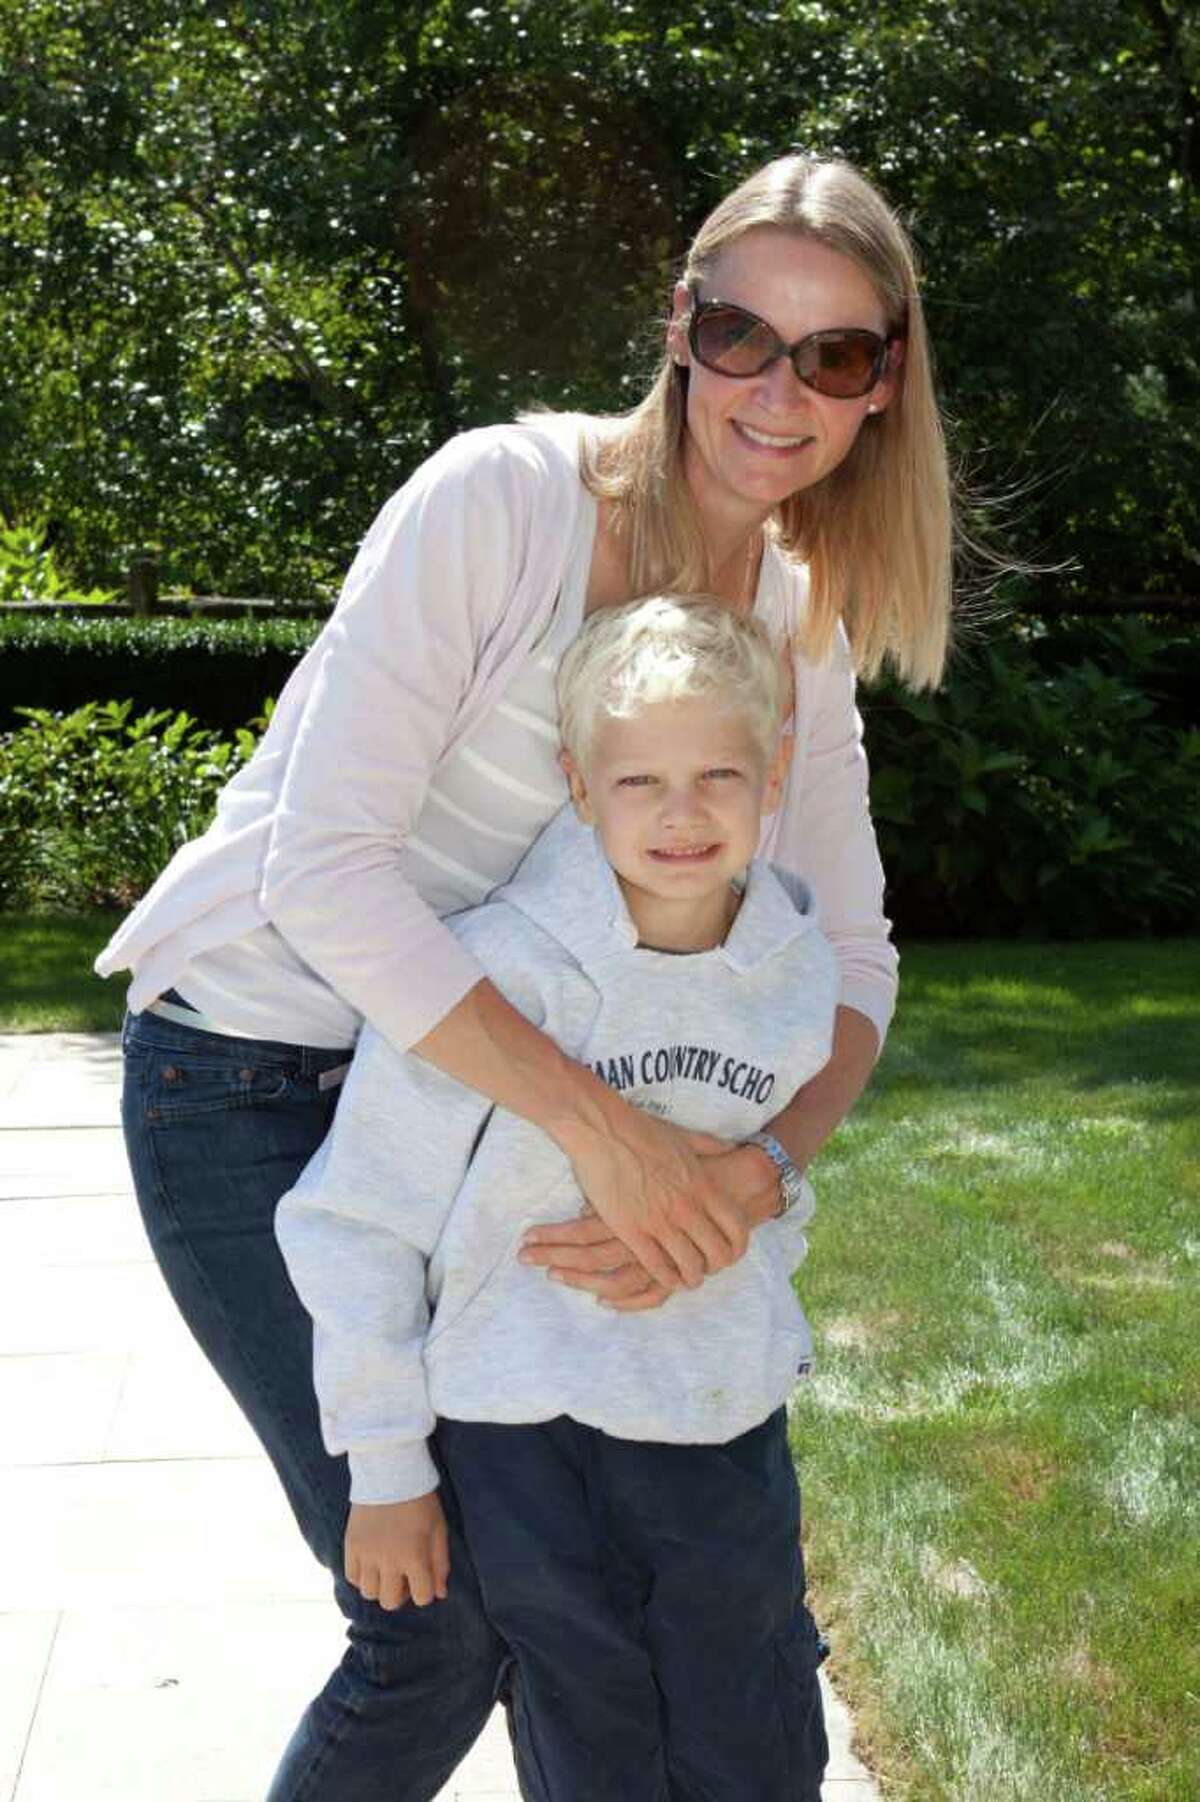 New Canaan residents Olivia English and her son, Miles, at the Food Allergy Initiative of Connecticut's Family Barbeque.